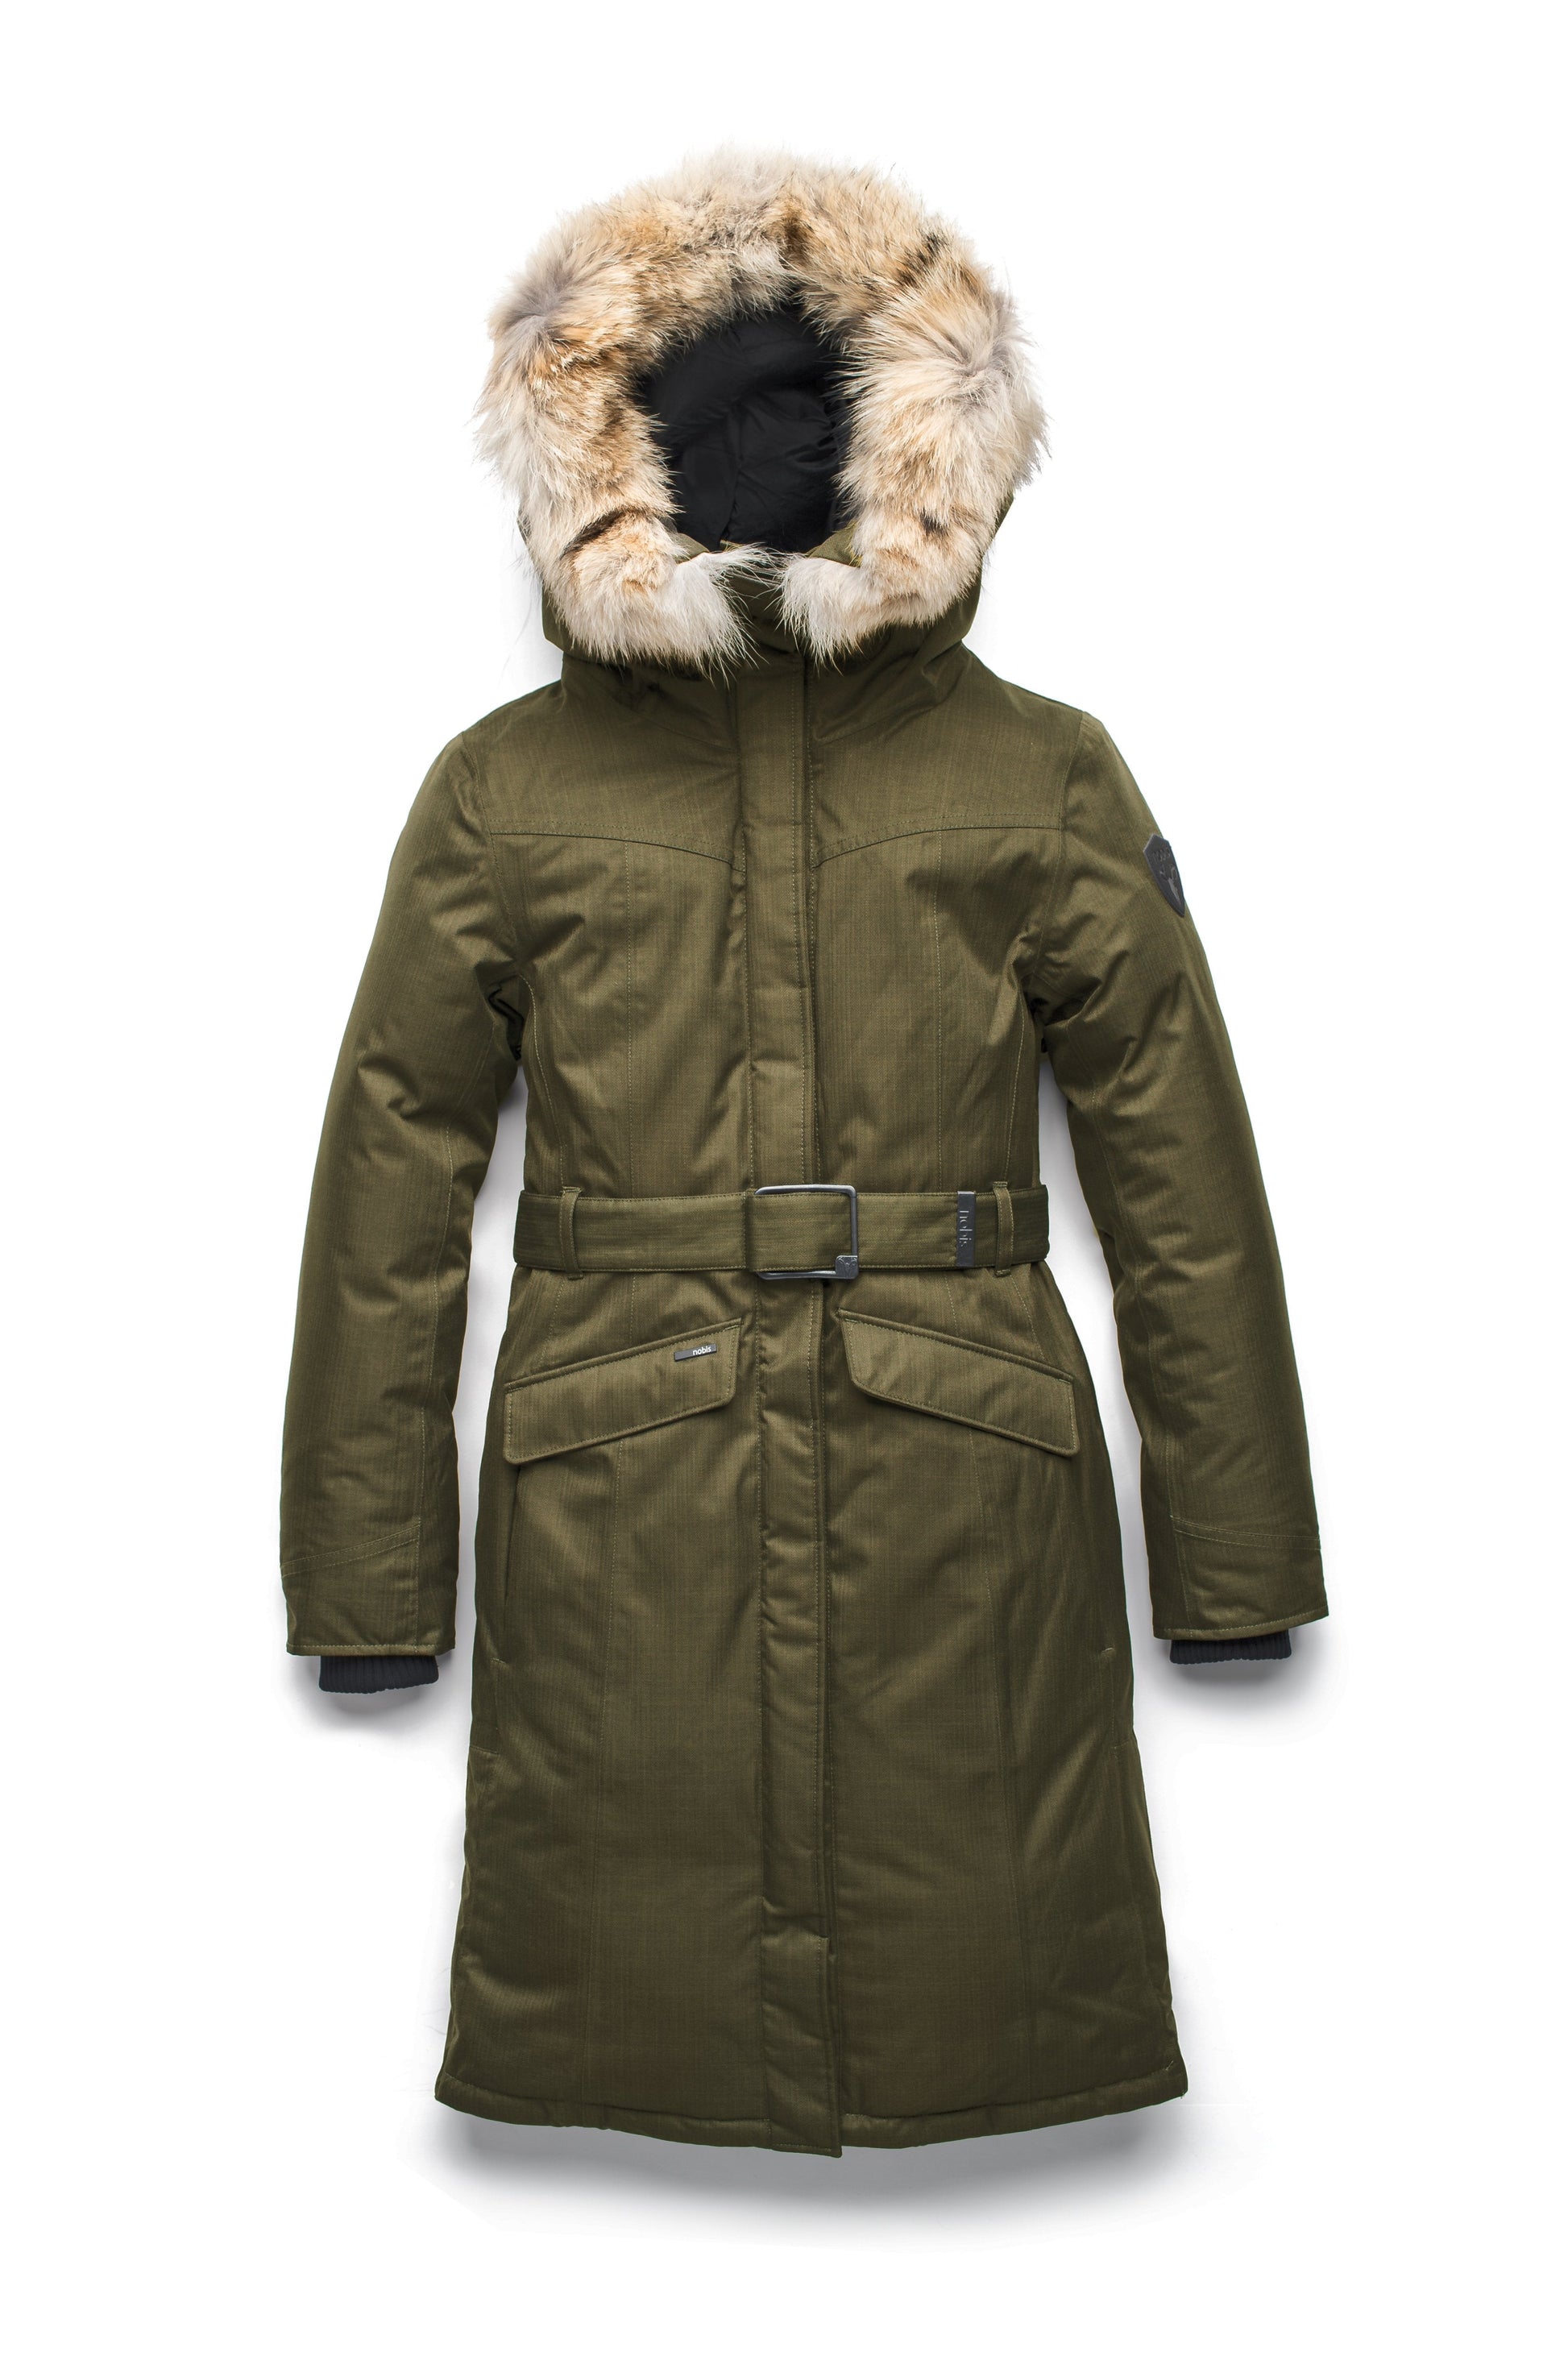 Women's maxi down filled parka with calf length hem in CH Fatigue